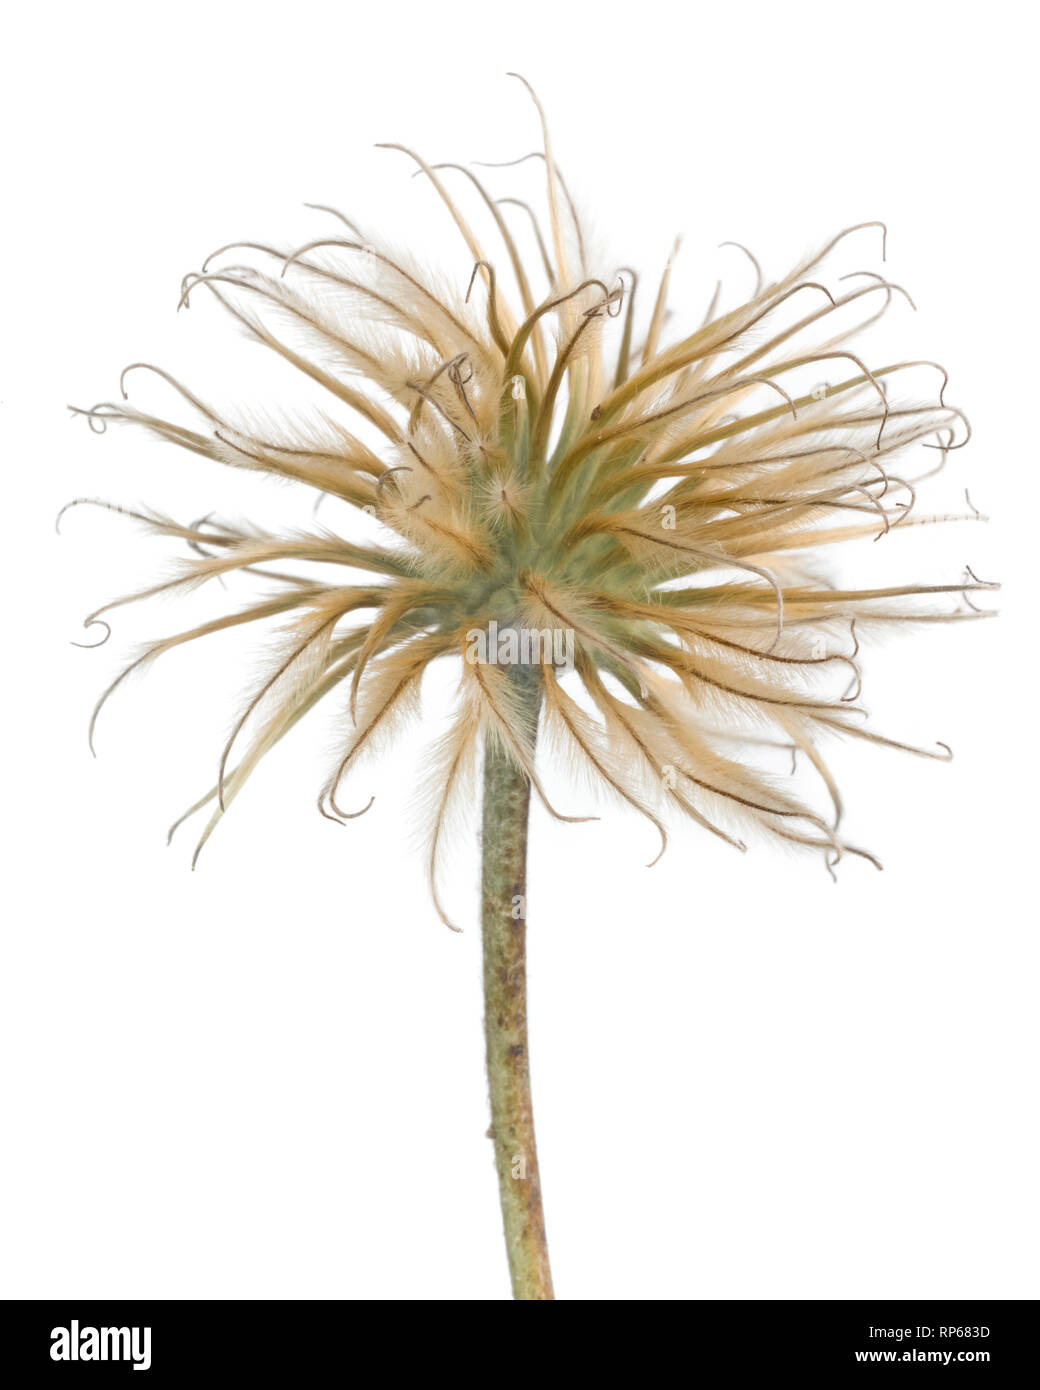 Clematis Seed Head against White Background Stock Photo